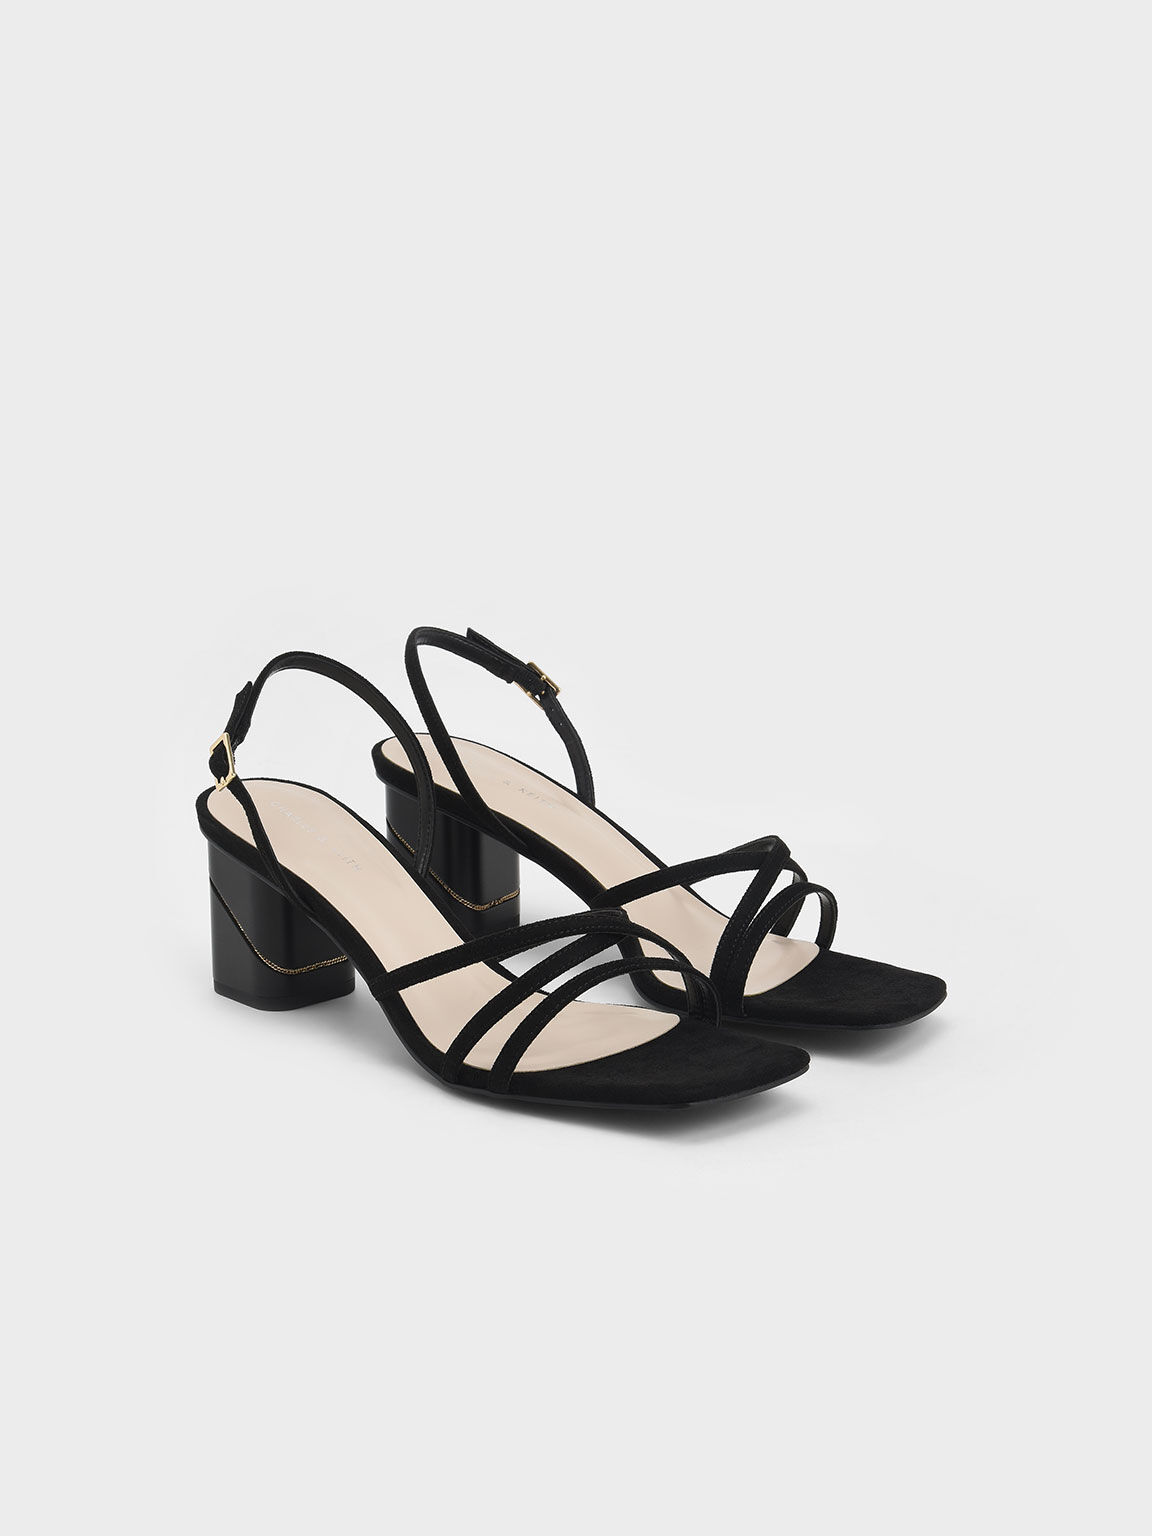 Black Textured Square Toe Slingback Sandals - CHARLES & KEITH 